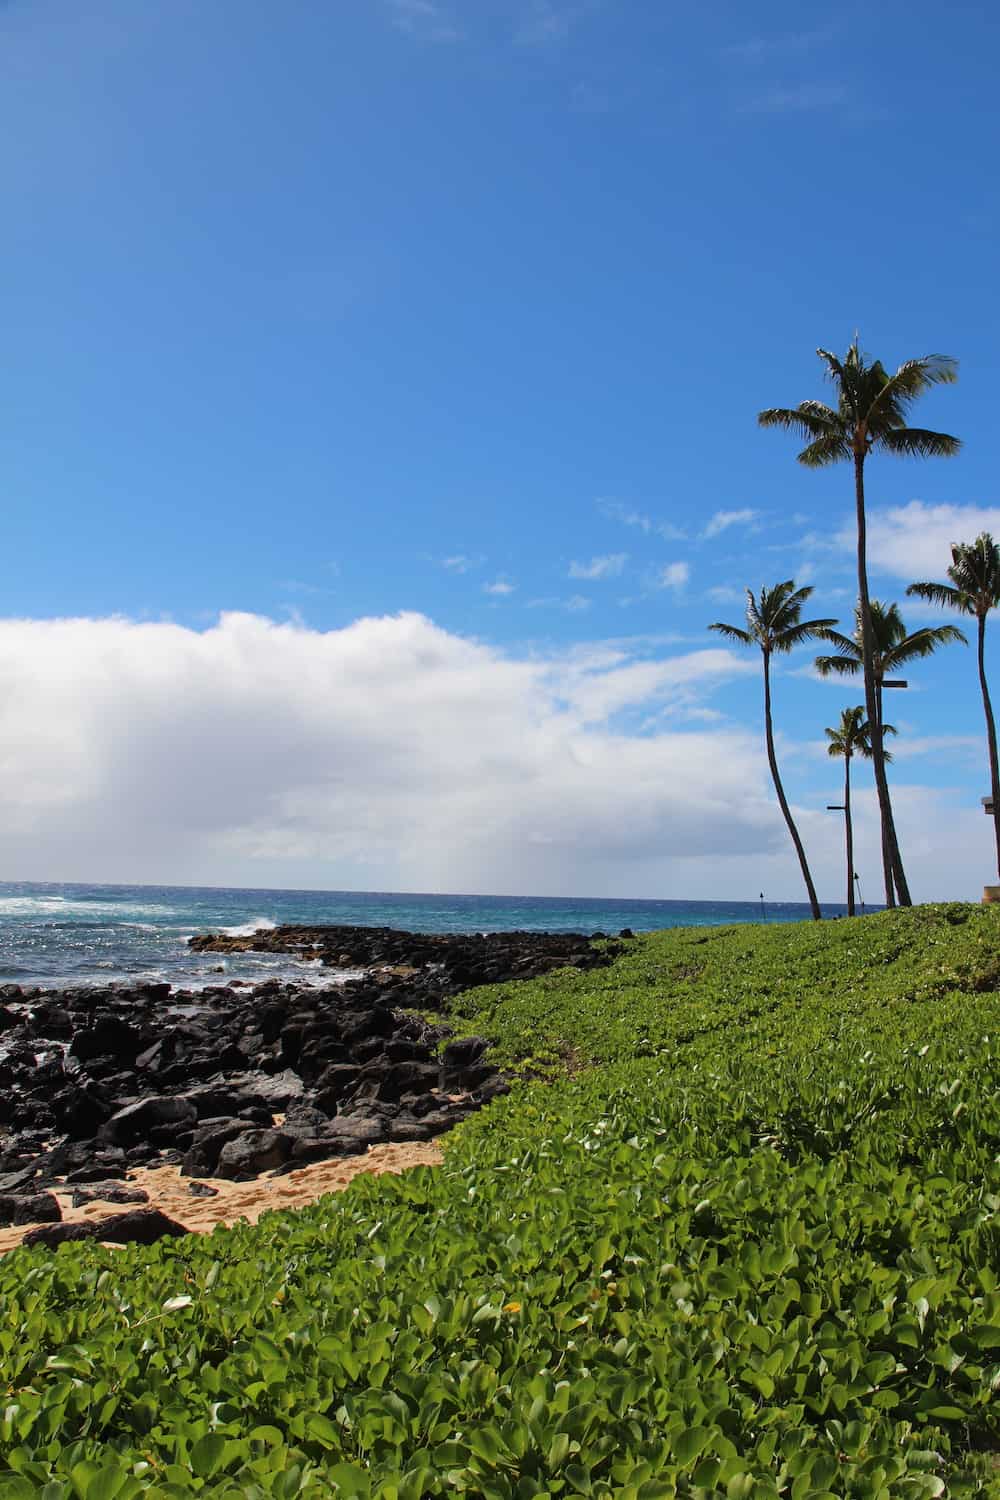 Pacific ocean shoreline with green plants, palm trees, volcanic rocks, and blue sky